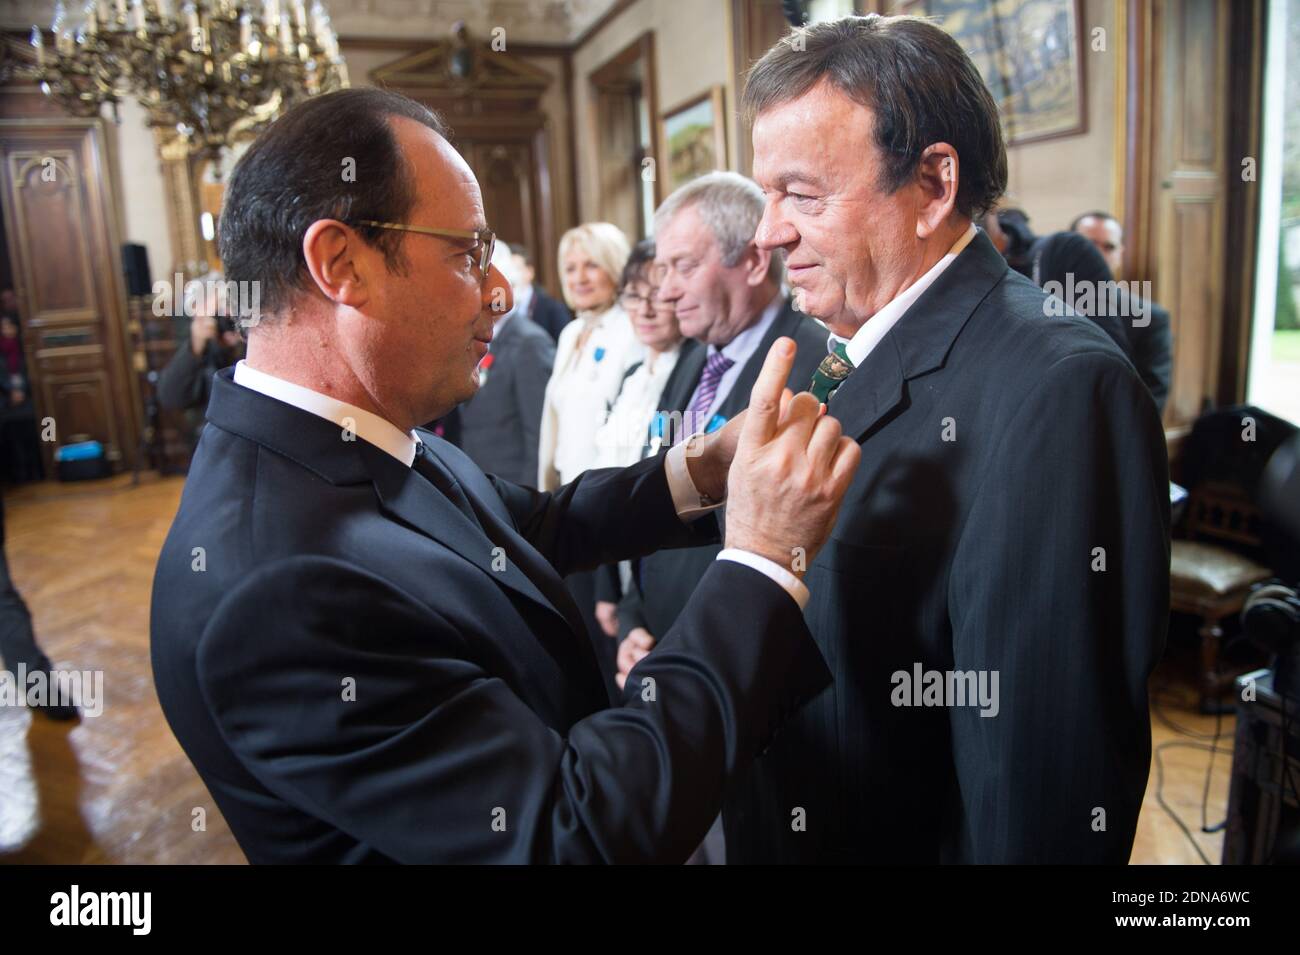 French President Francois Hollande holds a medal of Legion of Honor to Marc Boisseuil, Jean-Claude Boisdevesy, Pierre Mamers, Edith Perrier, Jean-Claude Talbert, Michelle Laurent-Bruzy, Patricia Broussole, Jean-Louis Chassaing, Fredy Dumas, during an award ceremony in Tulle, France, on January 17, 2015. Photo by Laurent Chamussy/Pool/ABACAPRESS.COM Stock Photo